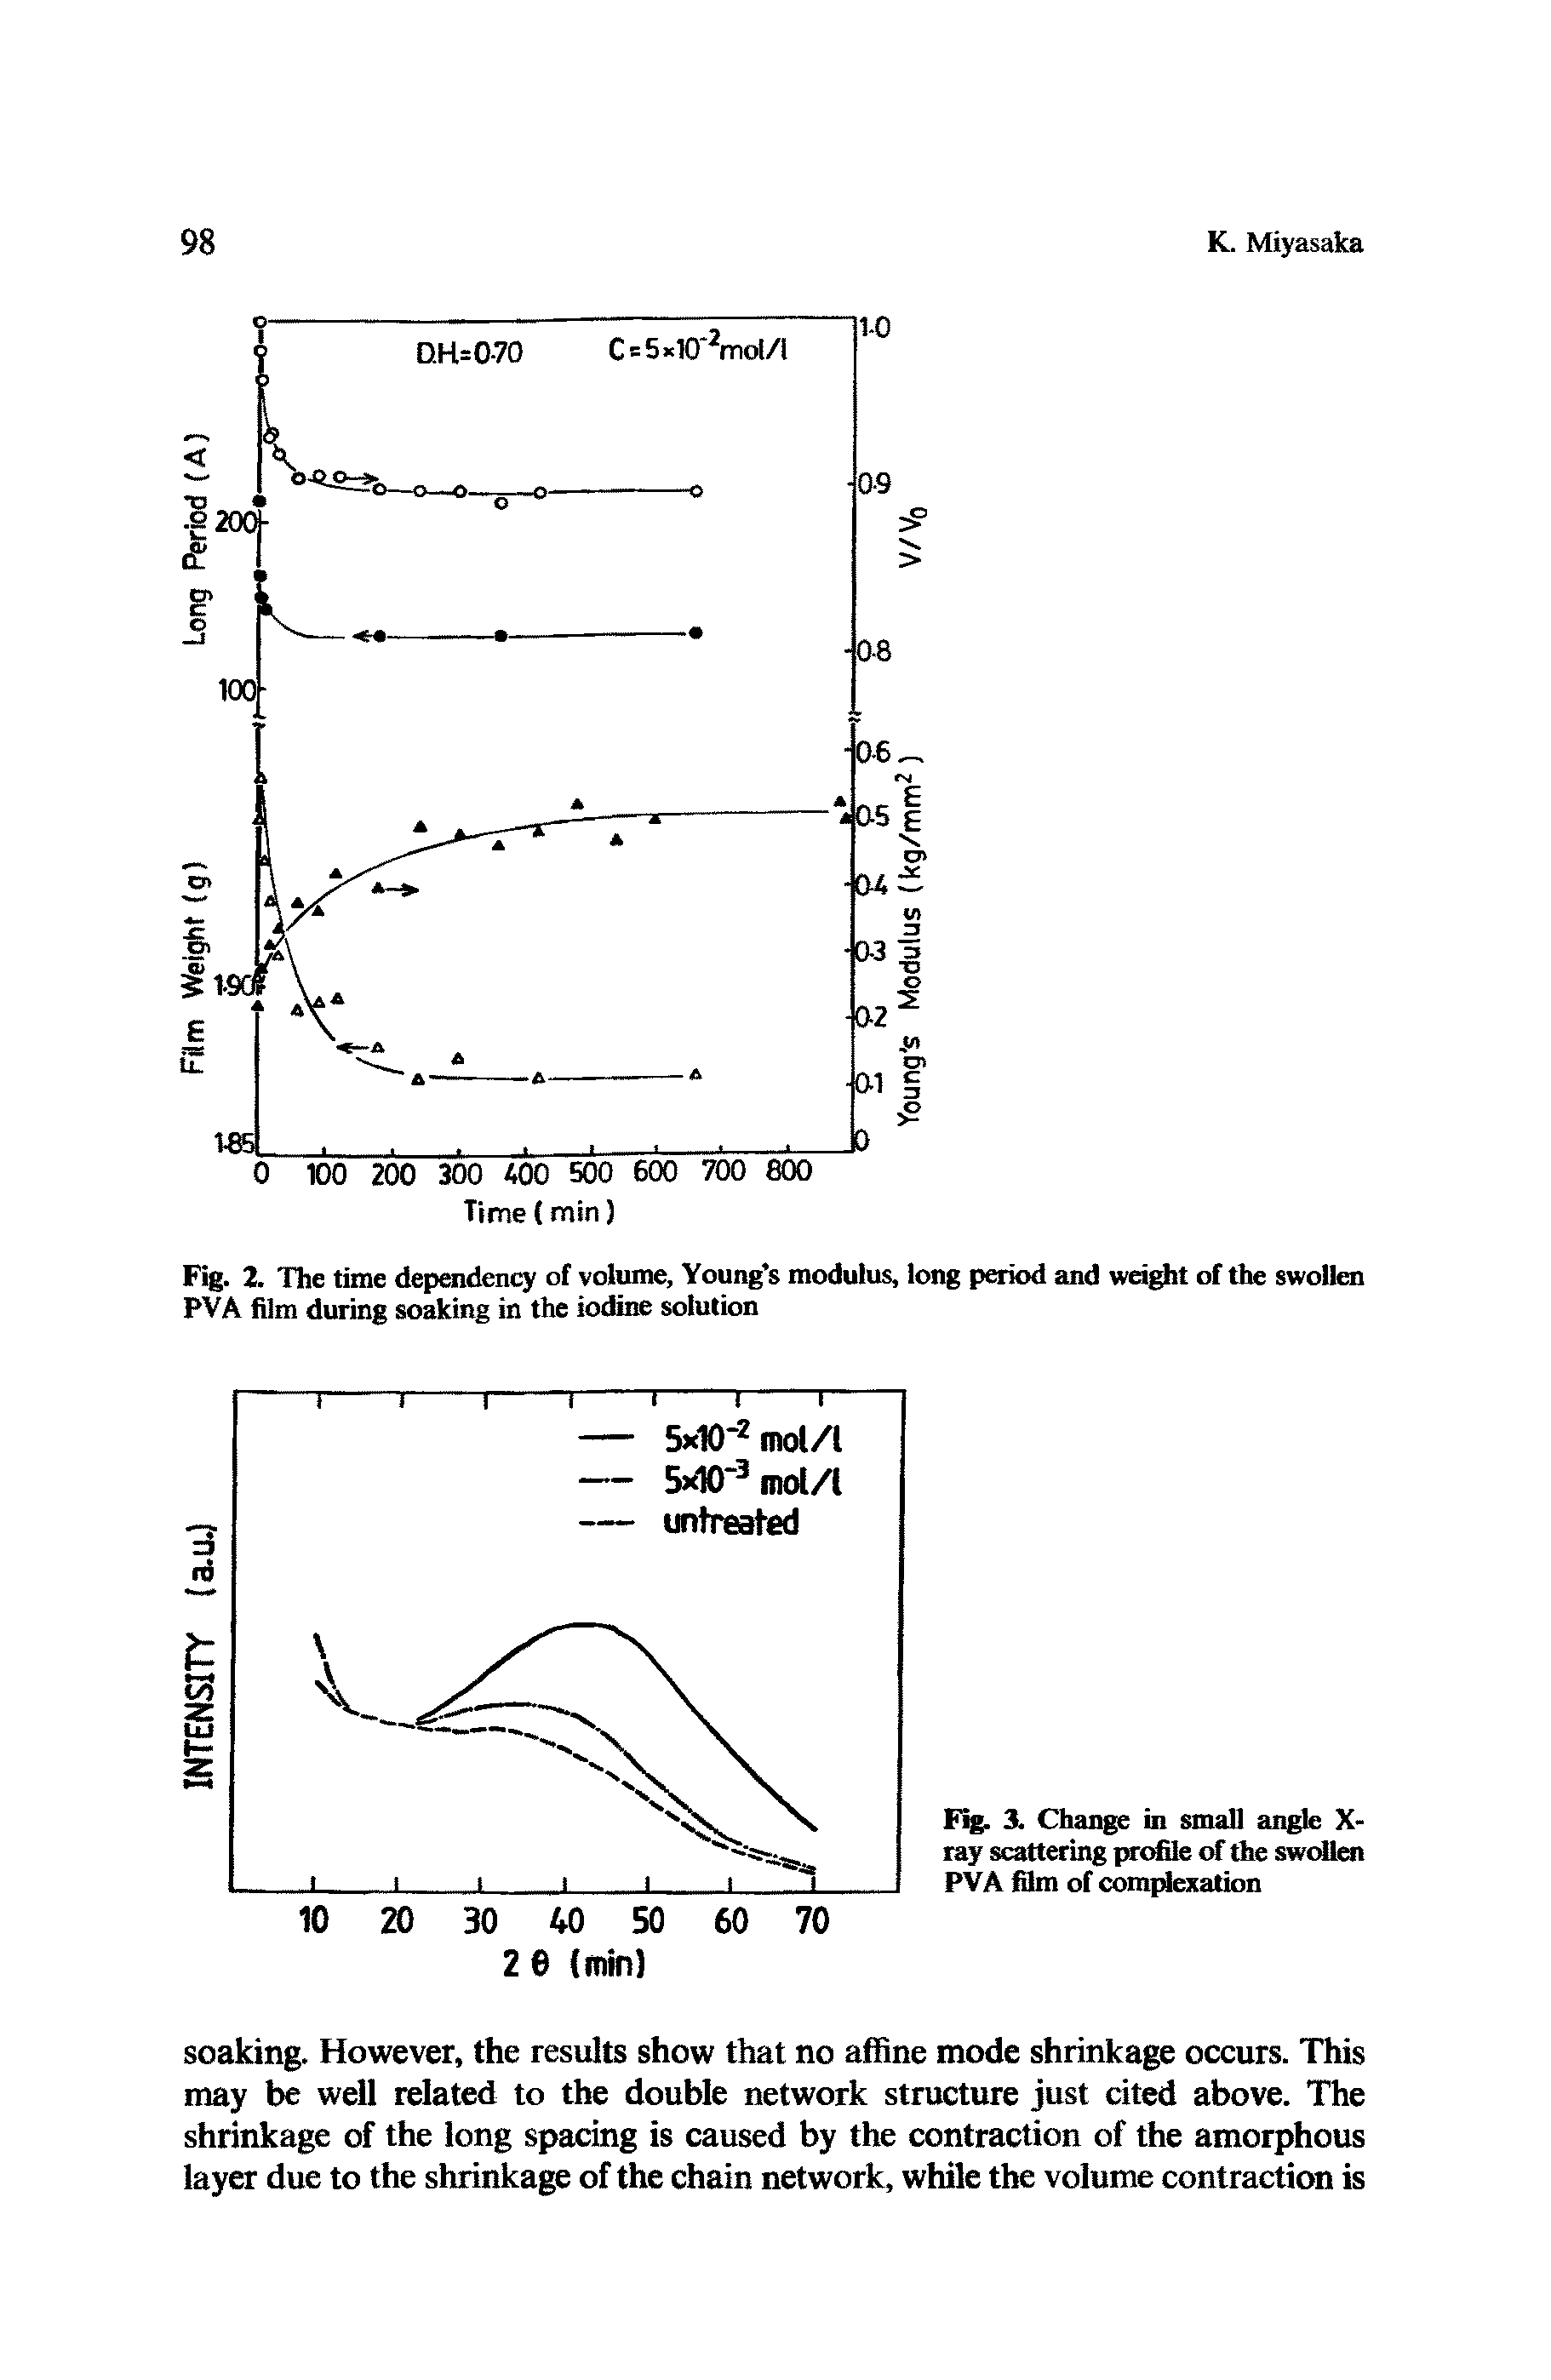 Fig. 2. The time dependency of volume, Young s modulus, long period and weight of the swollen PVA film during soaking in the iodine solution...